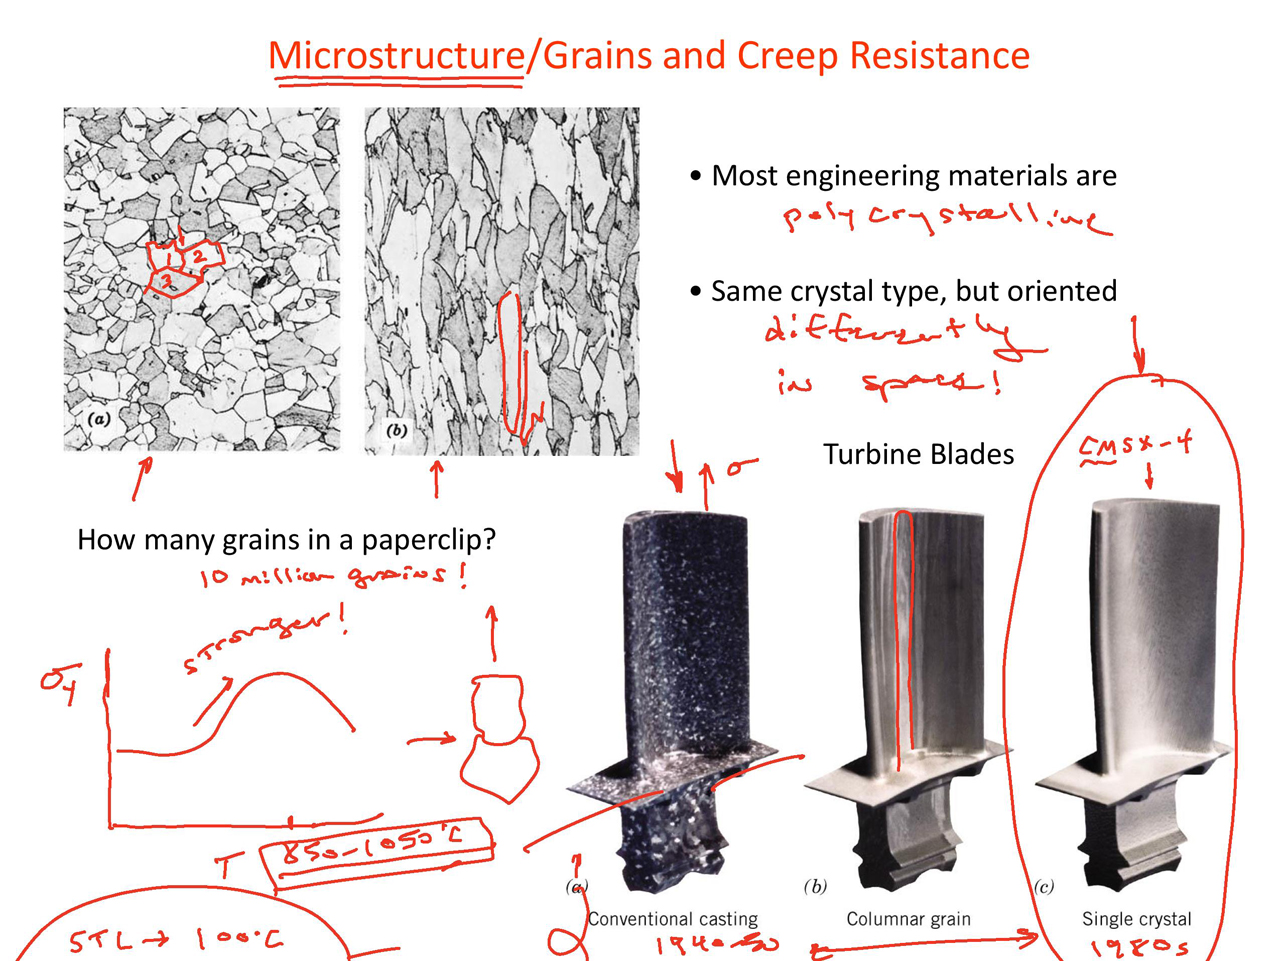 Microstructure/Grains and Creep Resistance